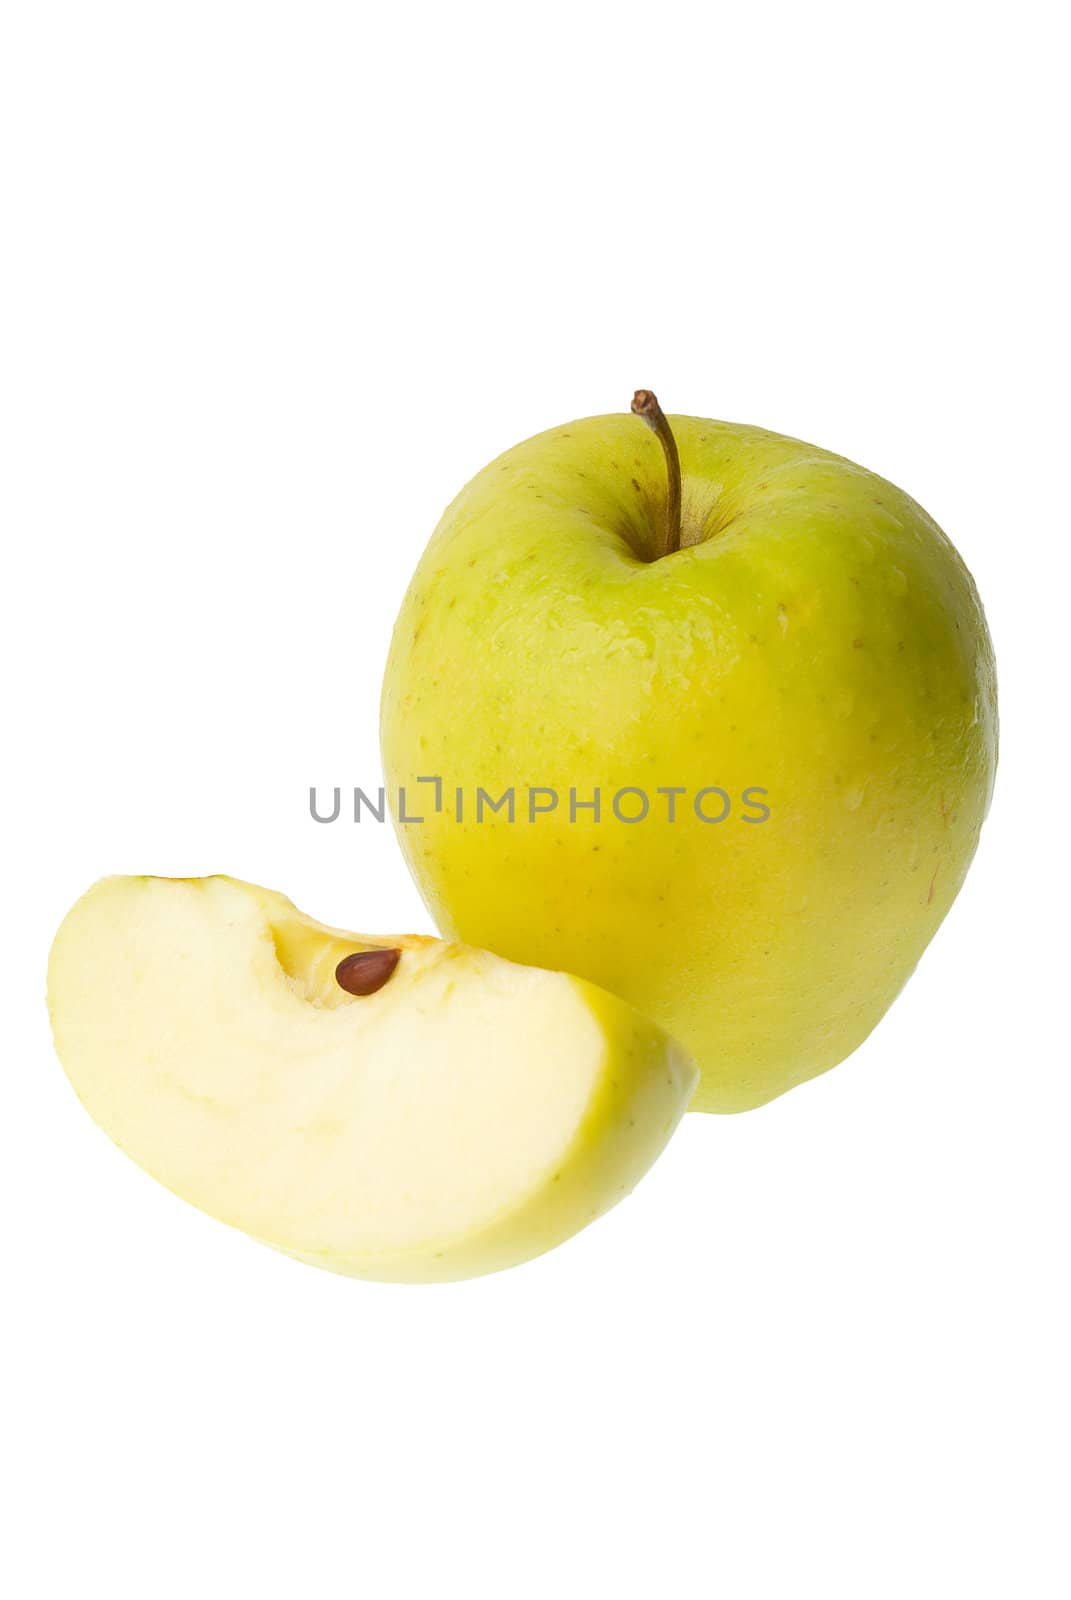 A half and a whole fresh green apple isolated on white background.